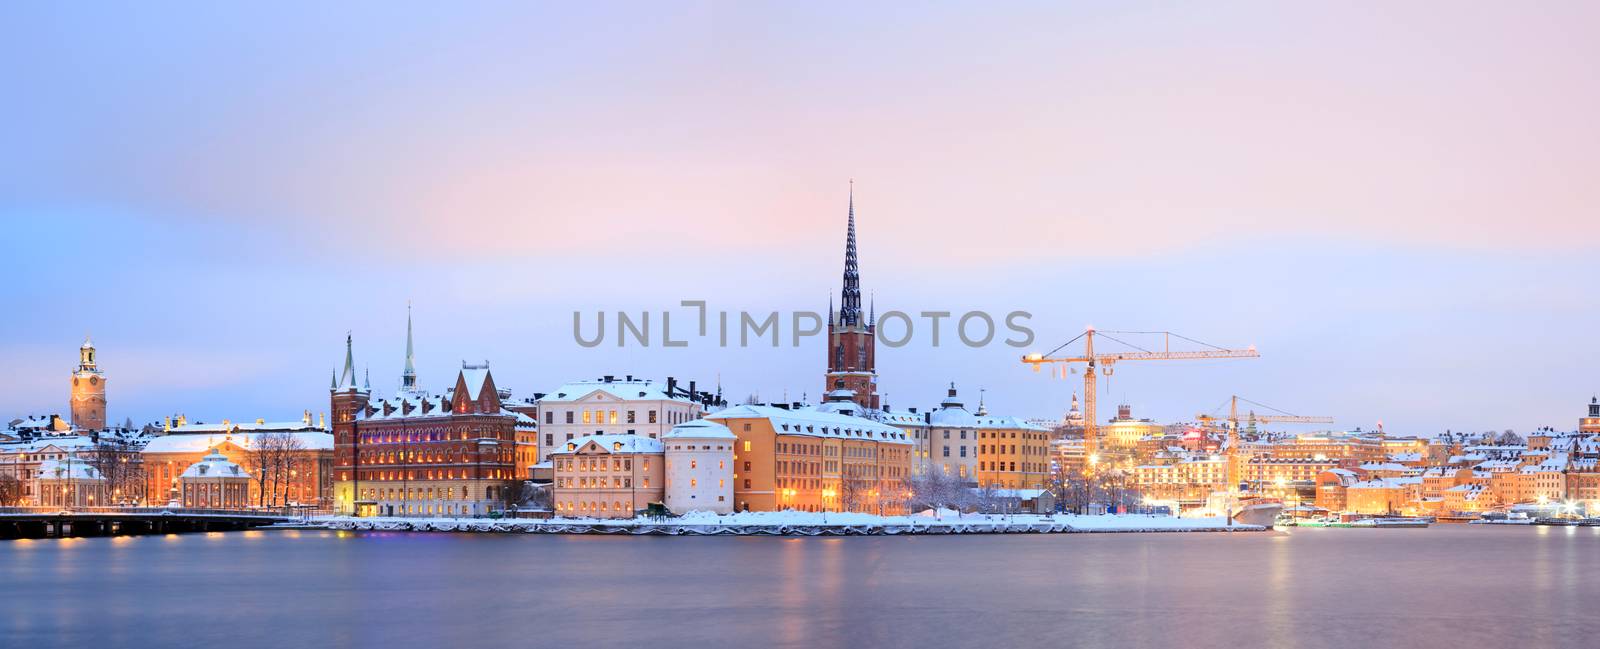 Panorama Cityscape of Stockholm Sweden at dusk